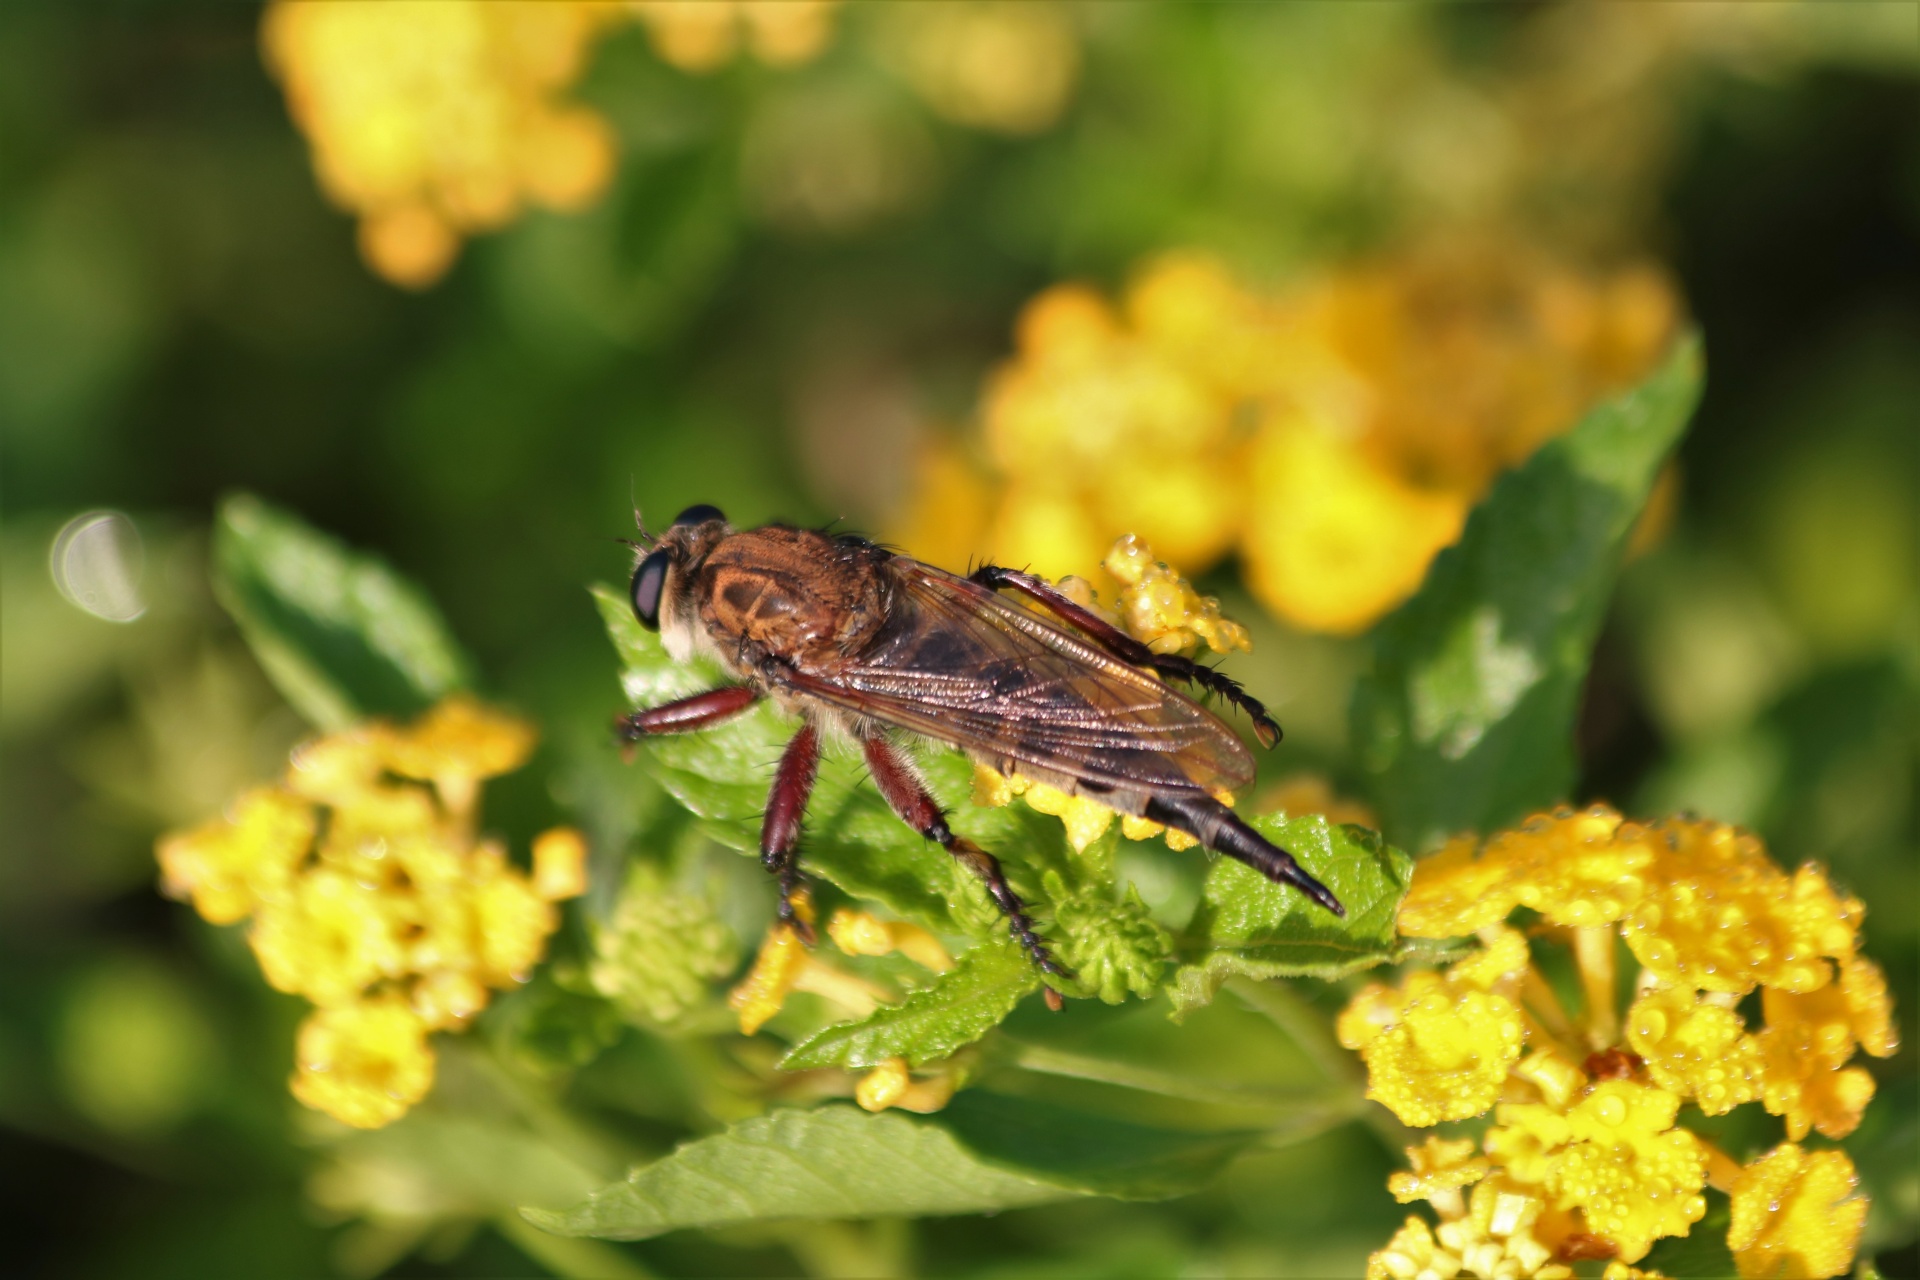 Giant Robber Fly On Yellow Flowers